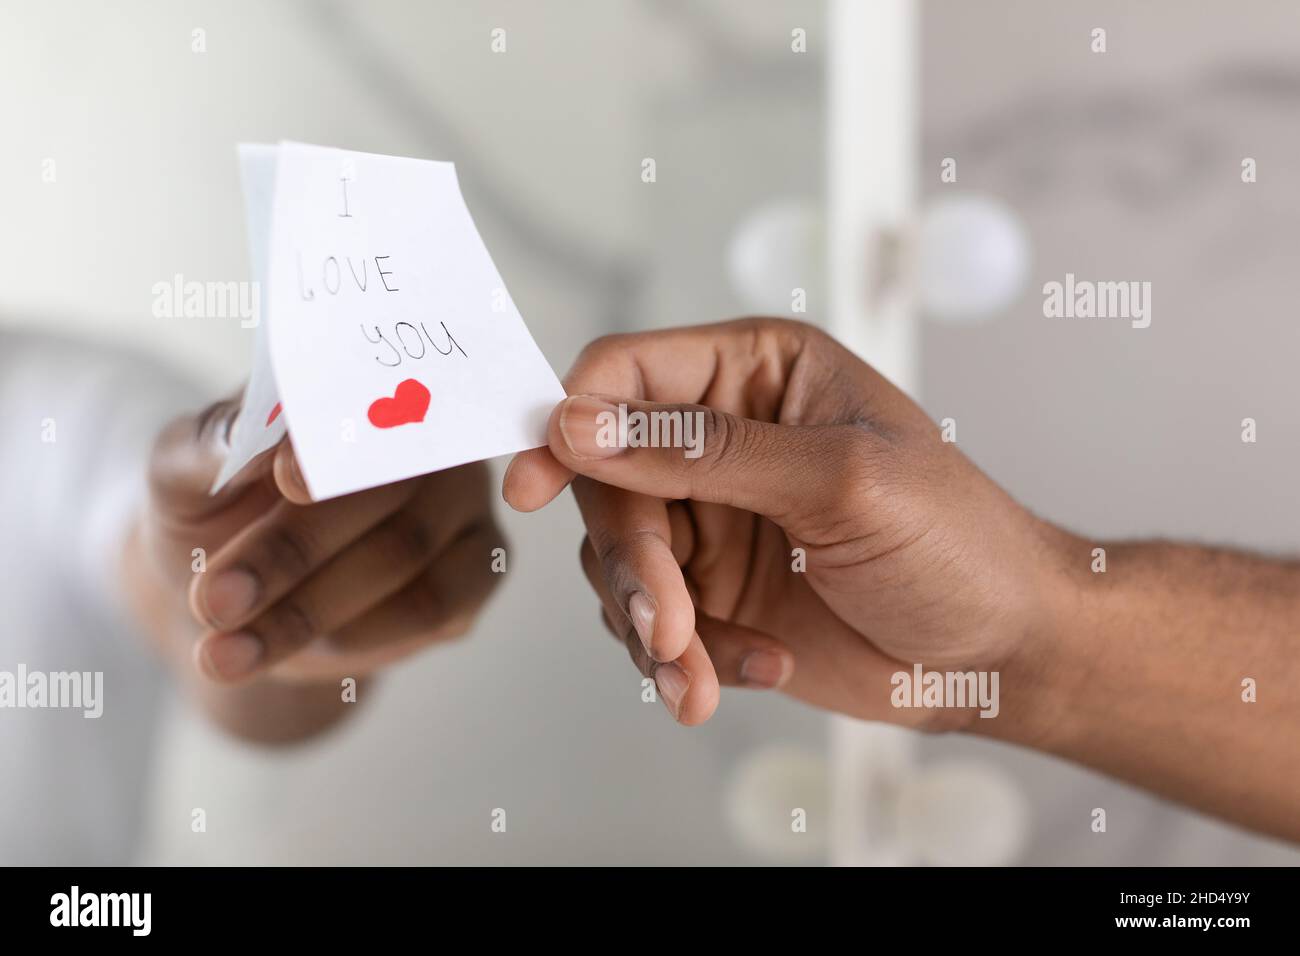 Male Hand Putting Sticky Note With I Love You Text On Mirror Stock Photo